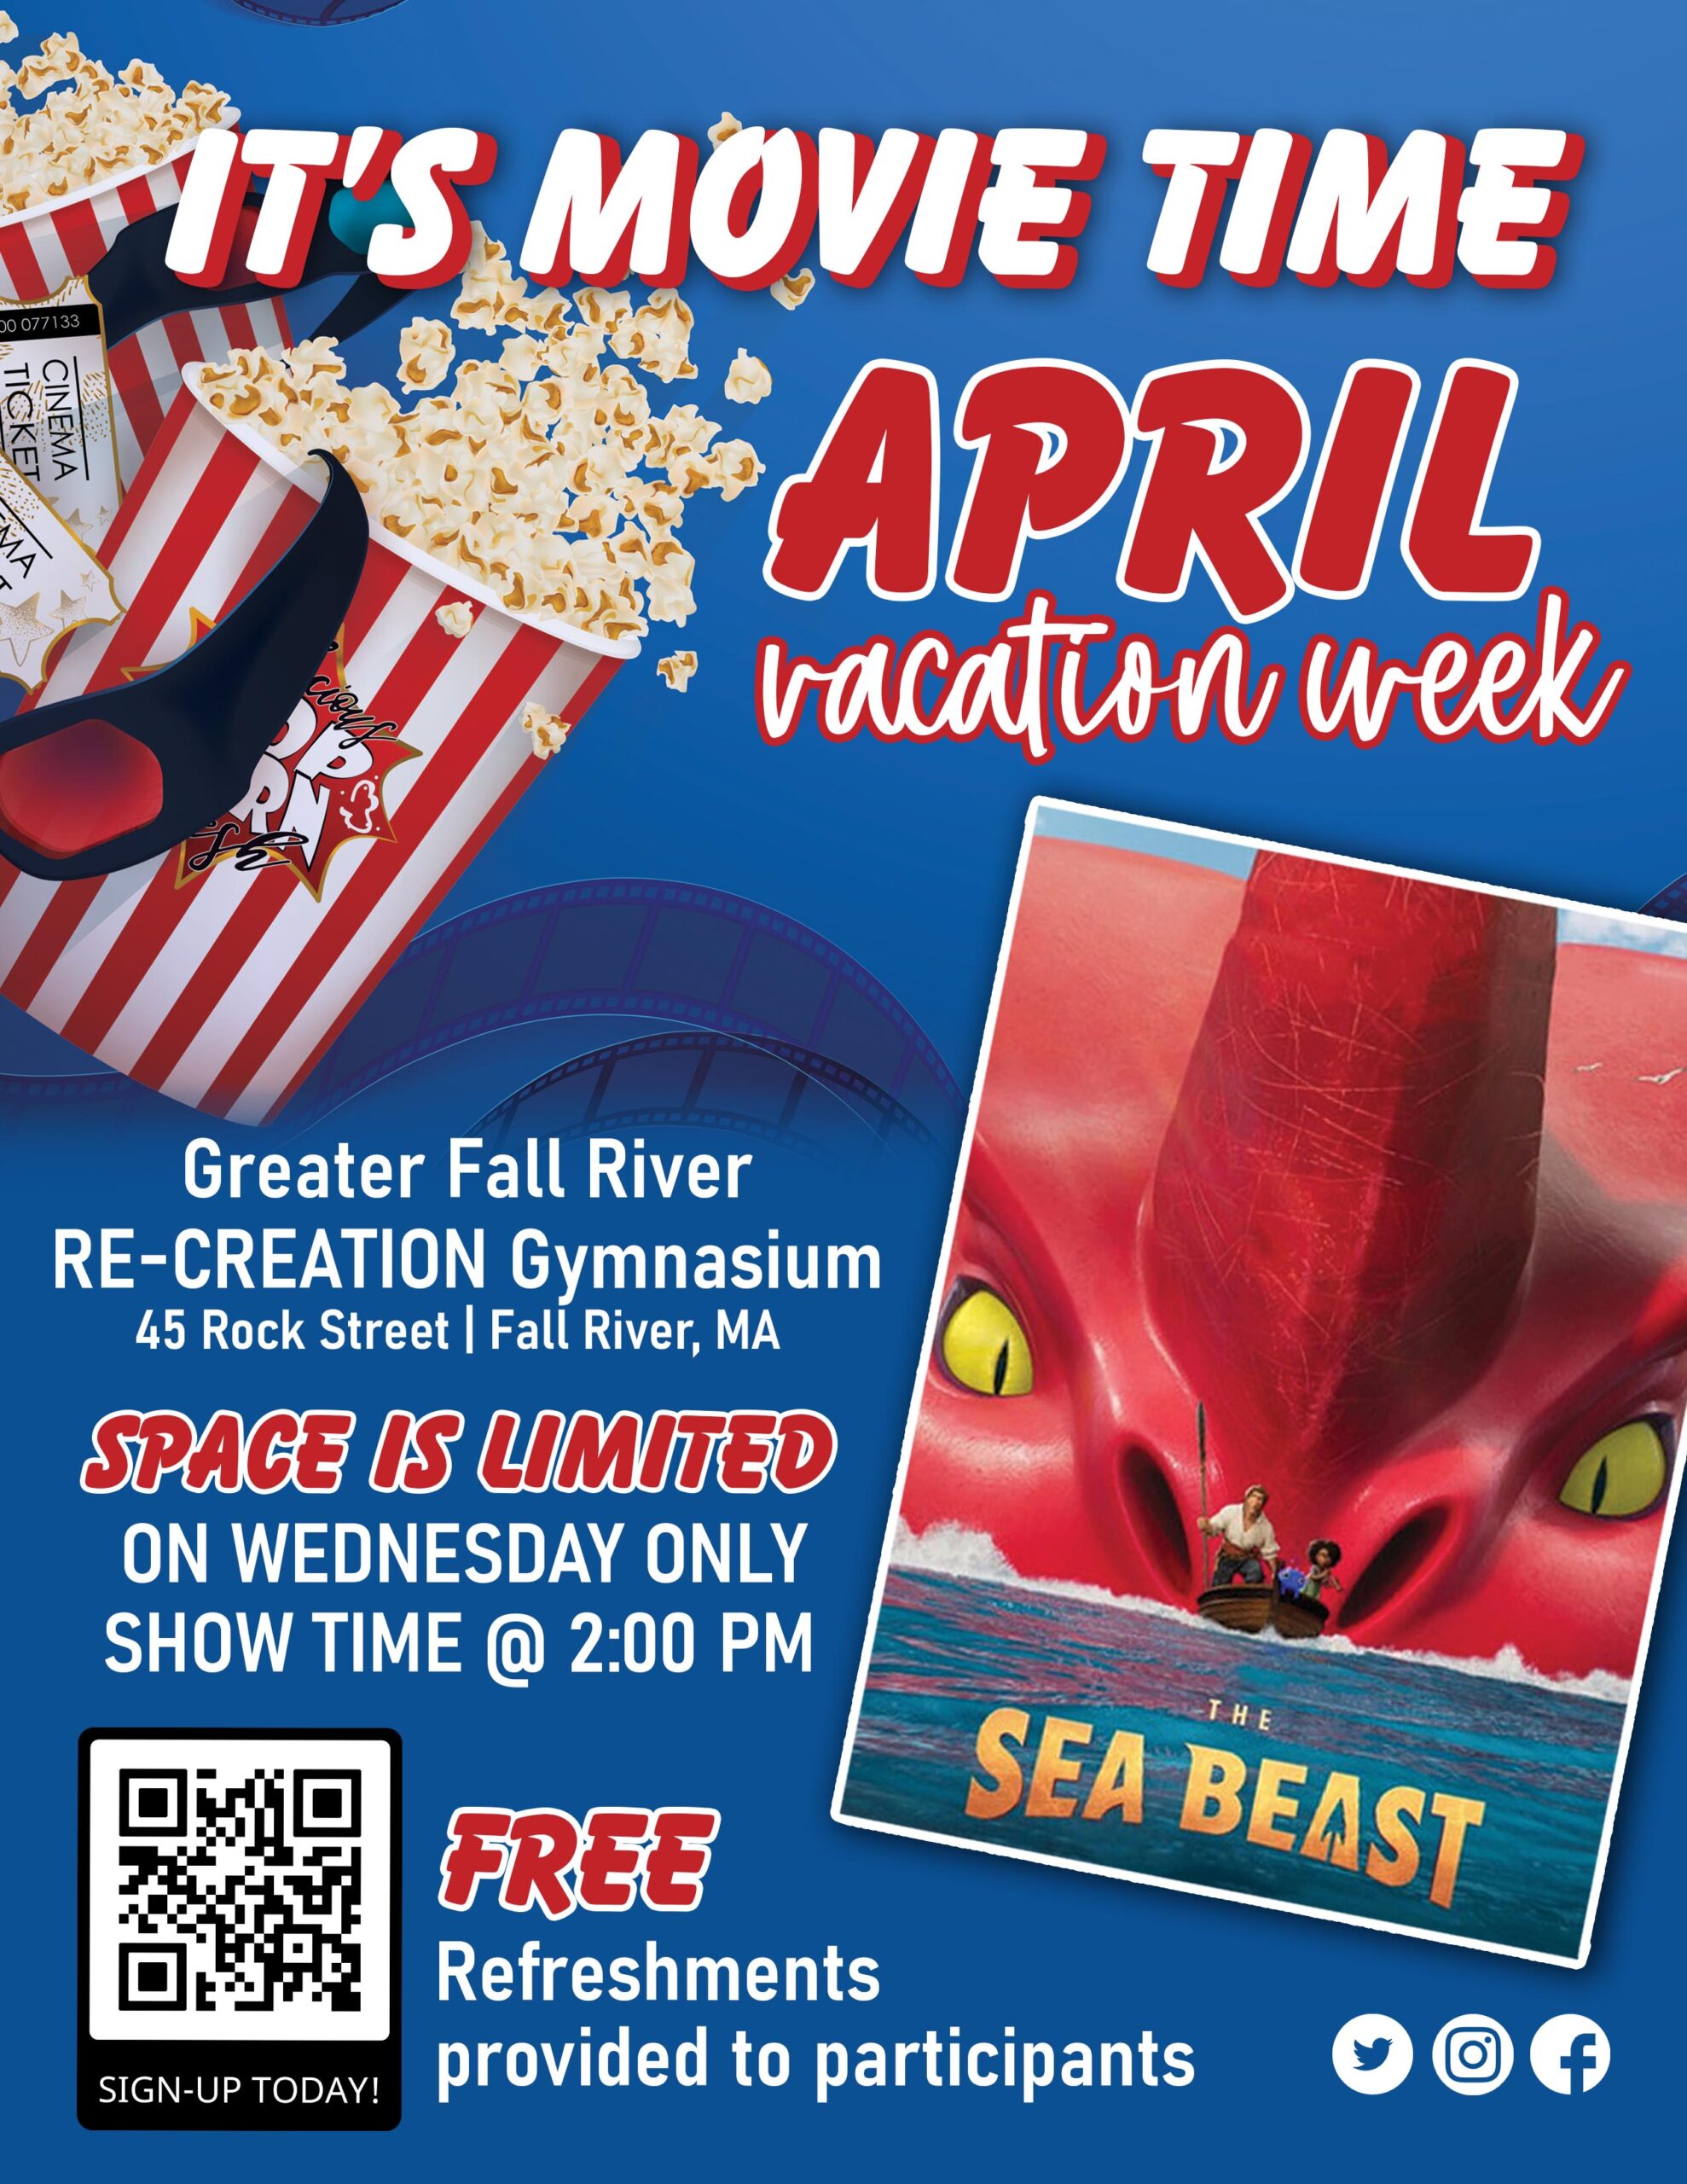 April Vacation Movie Time The Sea Beast Greater Fall River RECREATION